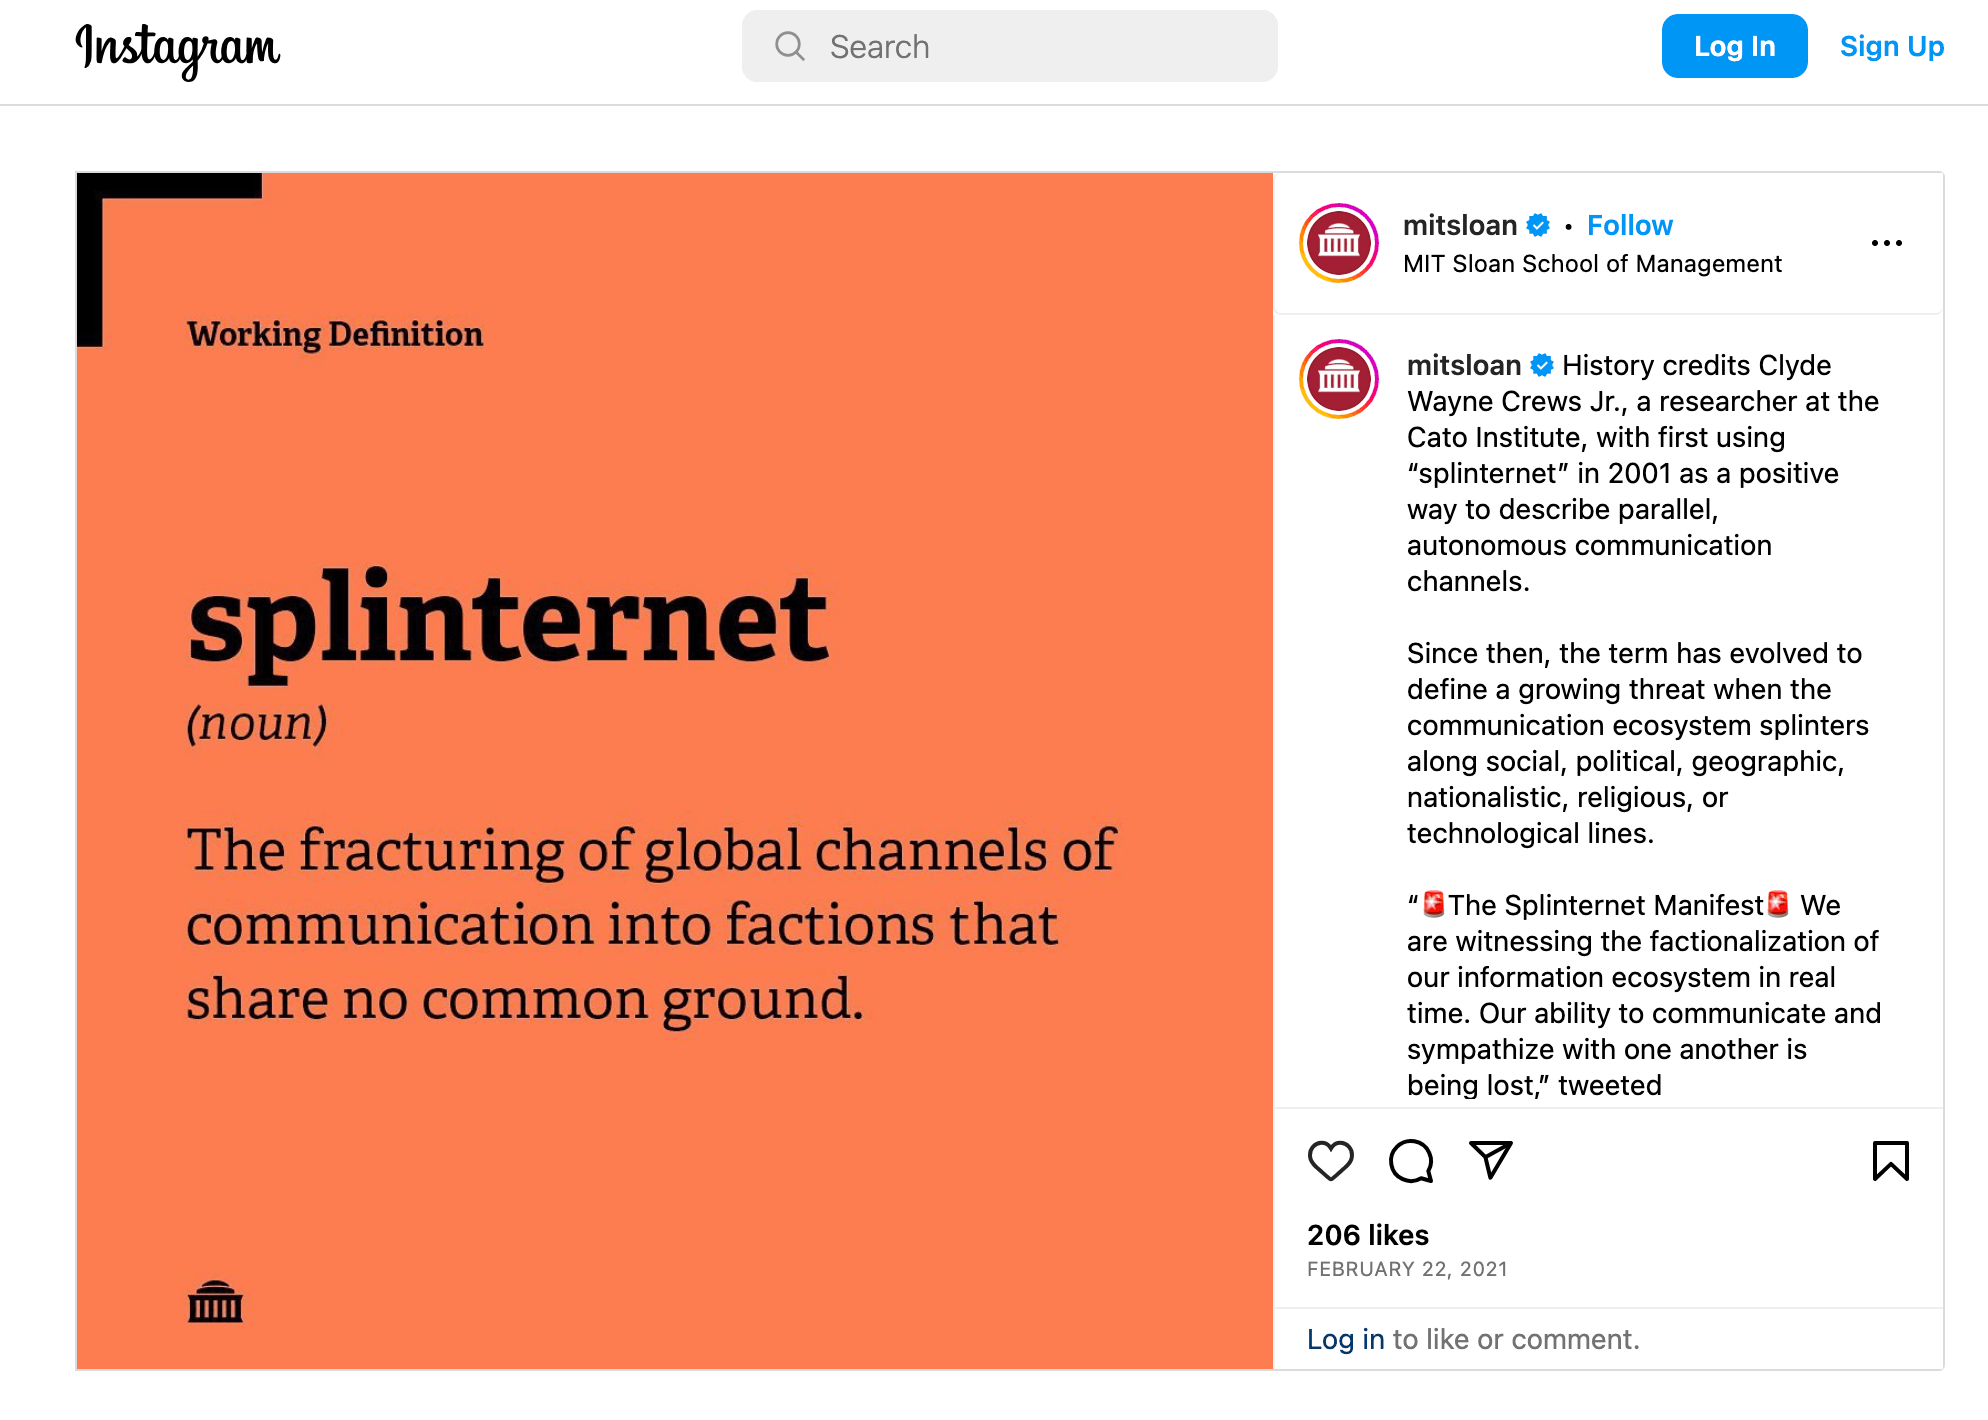 The MIT Sloan School of Management discussing the splinternet on IG